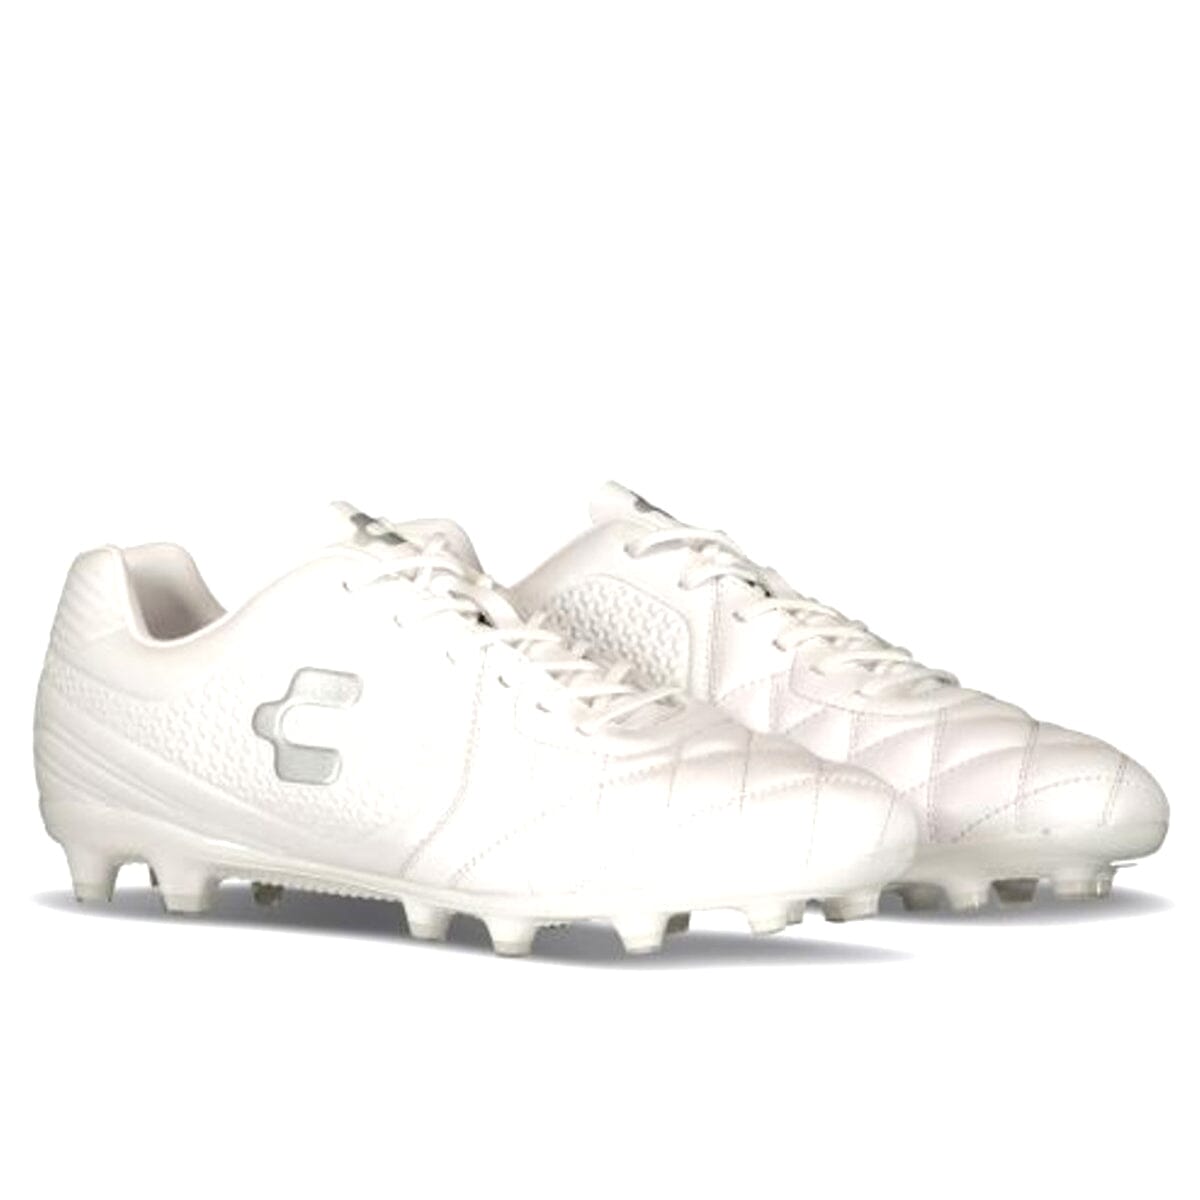 Charly Legendario 2.0 LT Firm Ground Soccer Cleats | 1086573001 Cleats Charly 